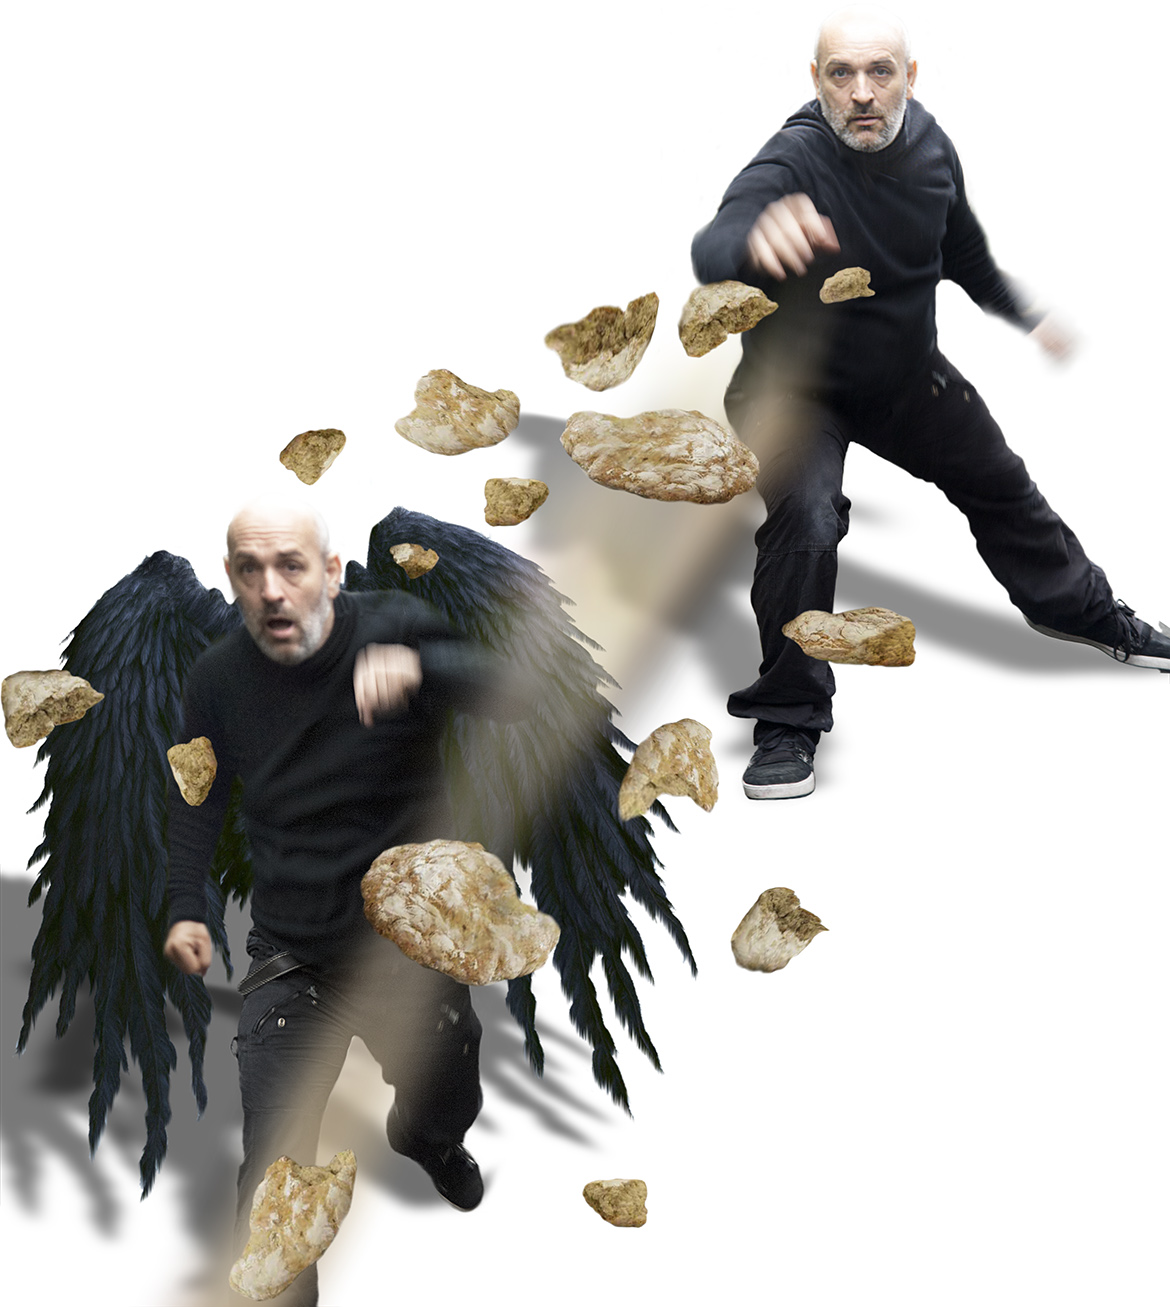 &quot;THE WAR AGAINST THE EVIL&quot; - THE BREADS ATTACK